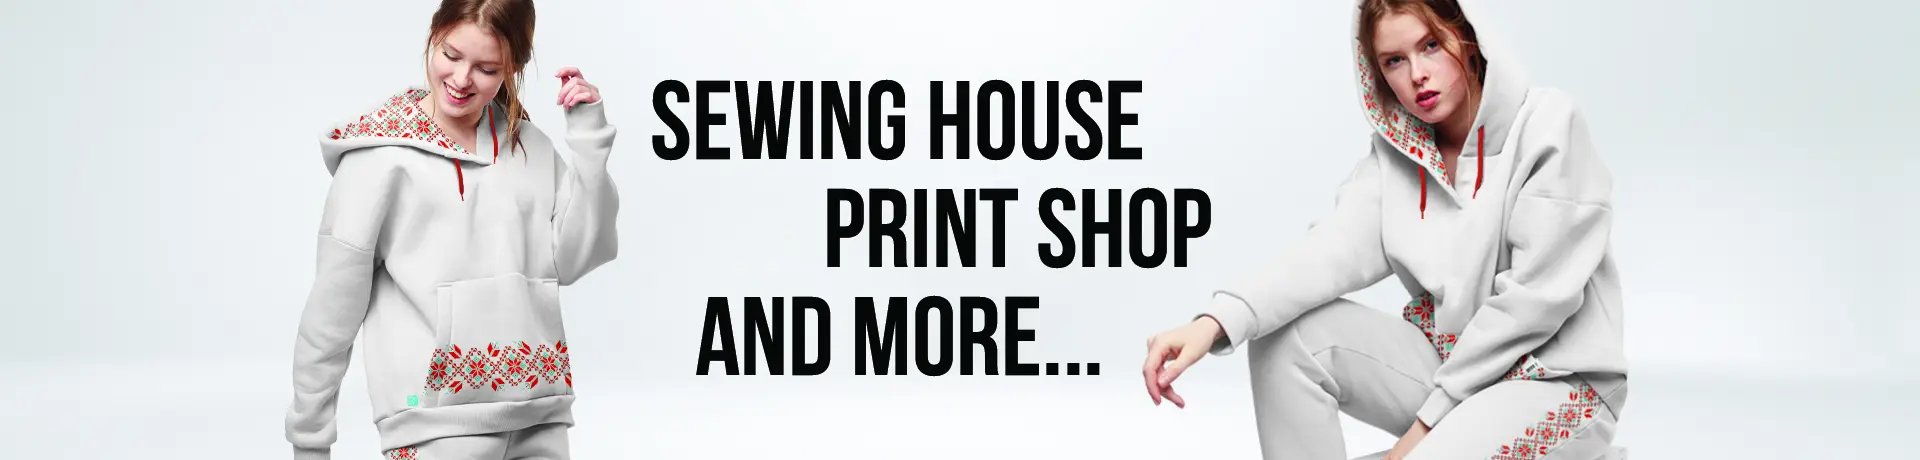 Baner univers - sweing house print shop and more